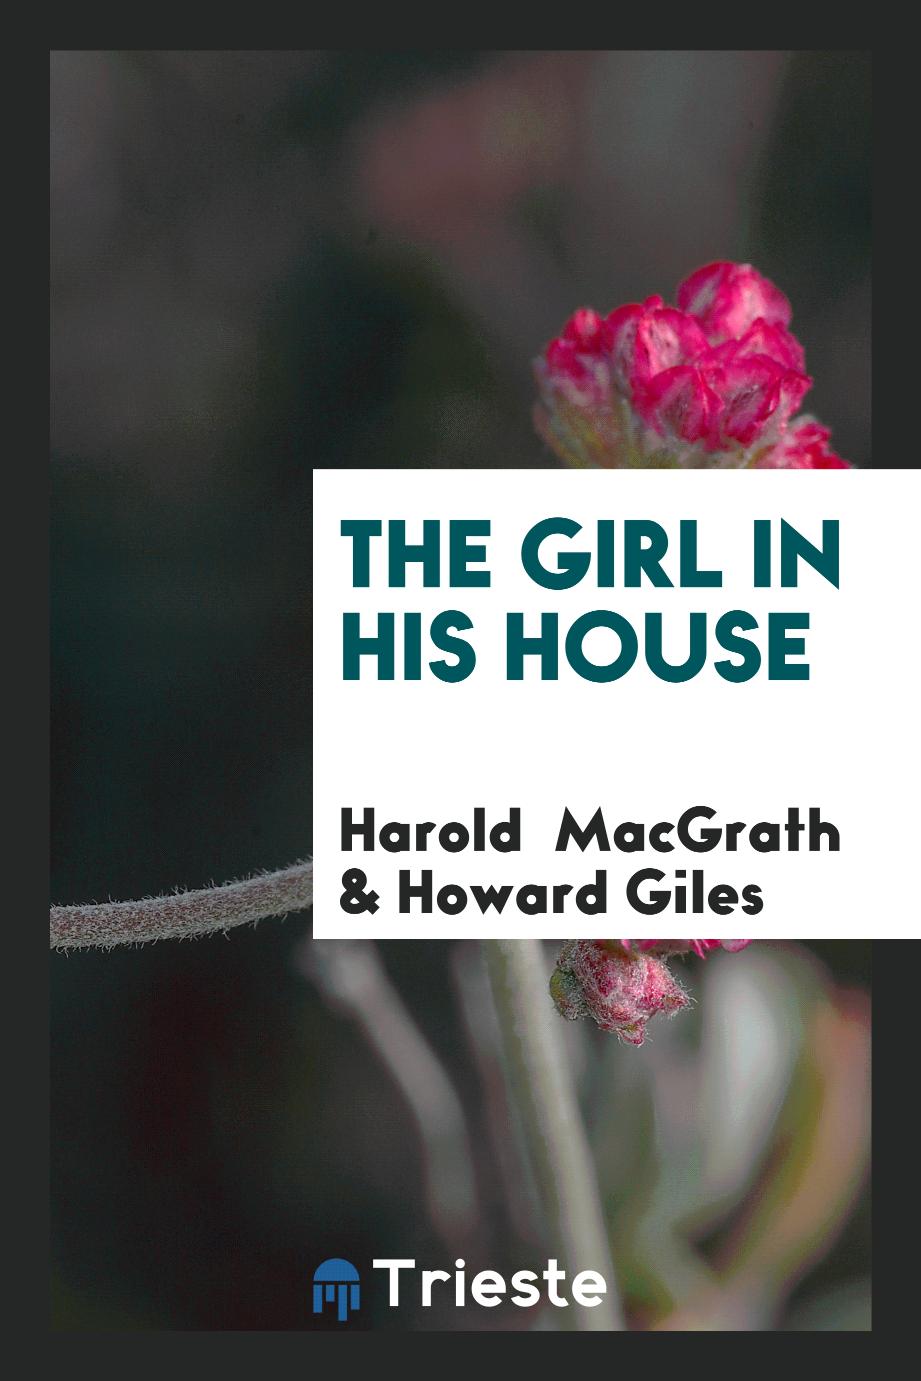 The Girl in His House